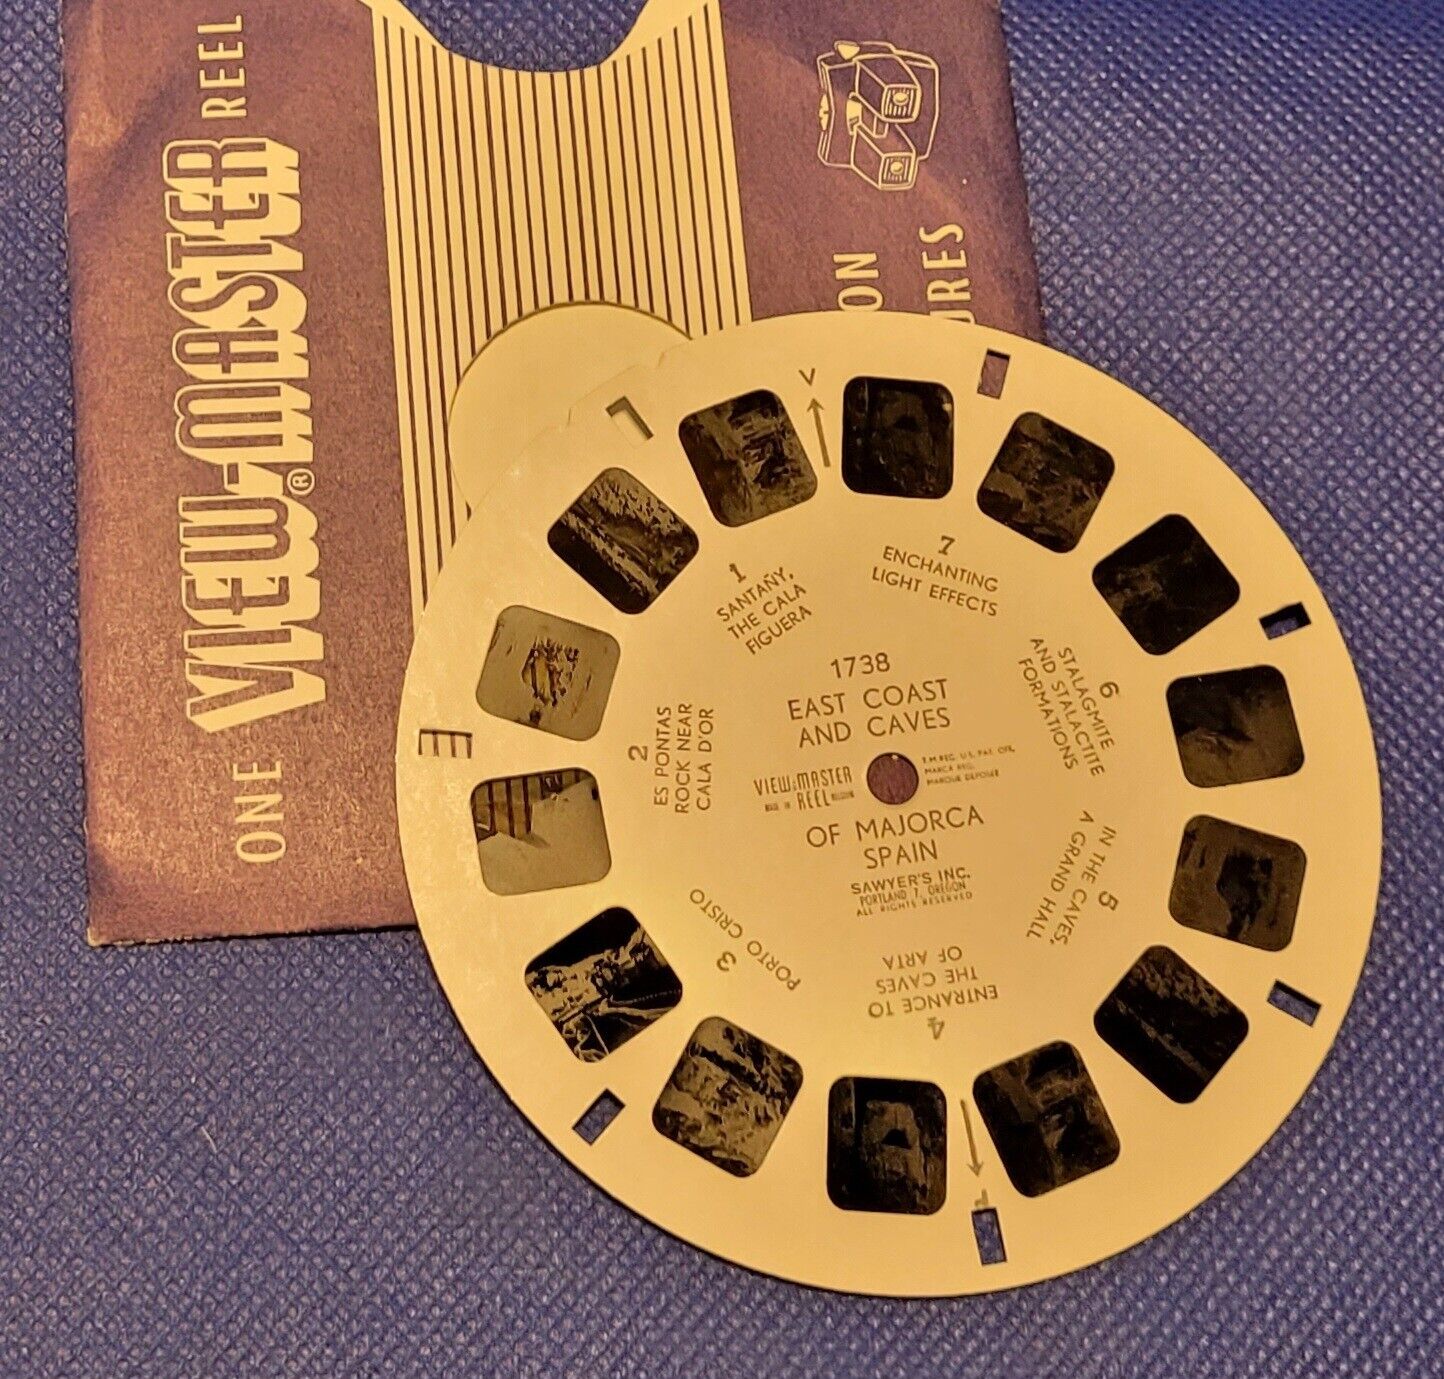 Sawyer\'s Single view-master Reel 1738 East Coast and Caves of Majorca Spain